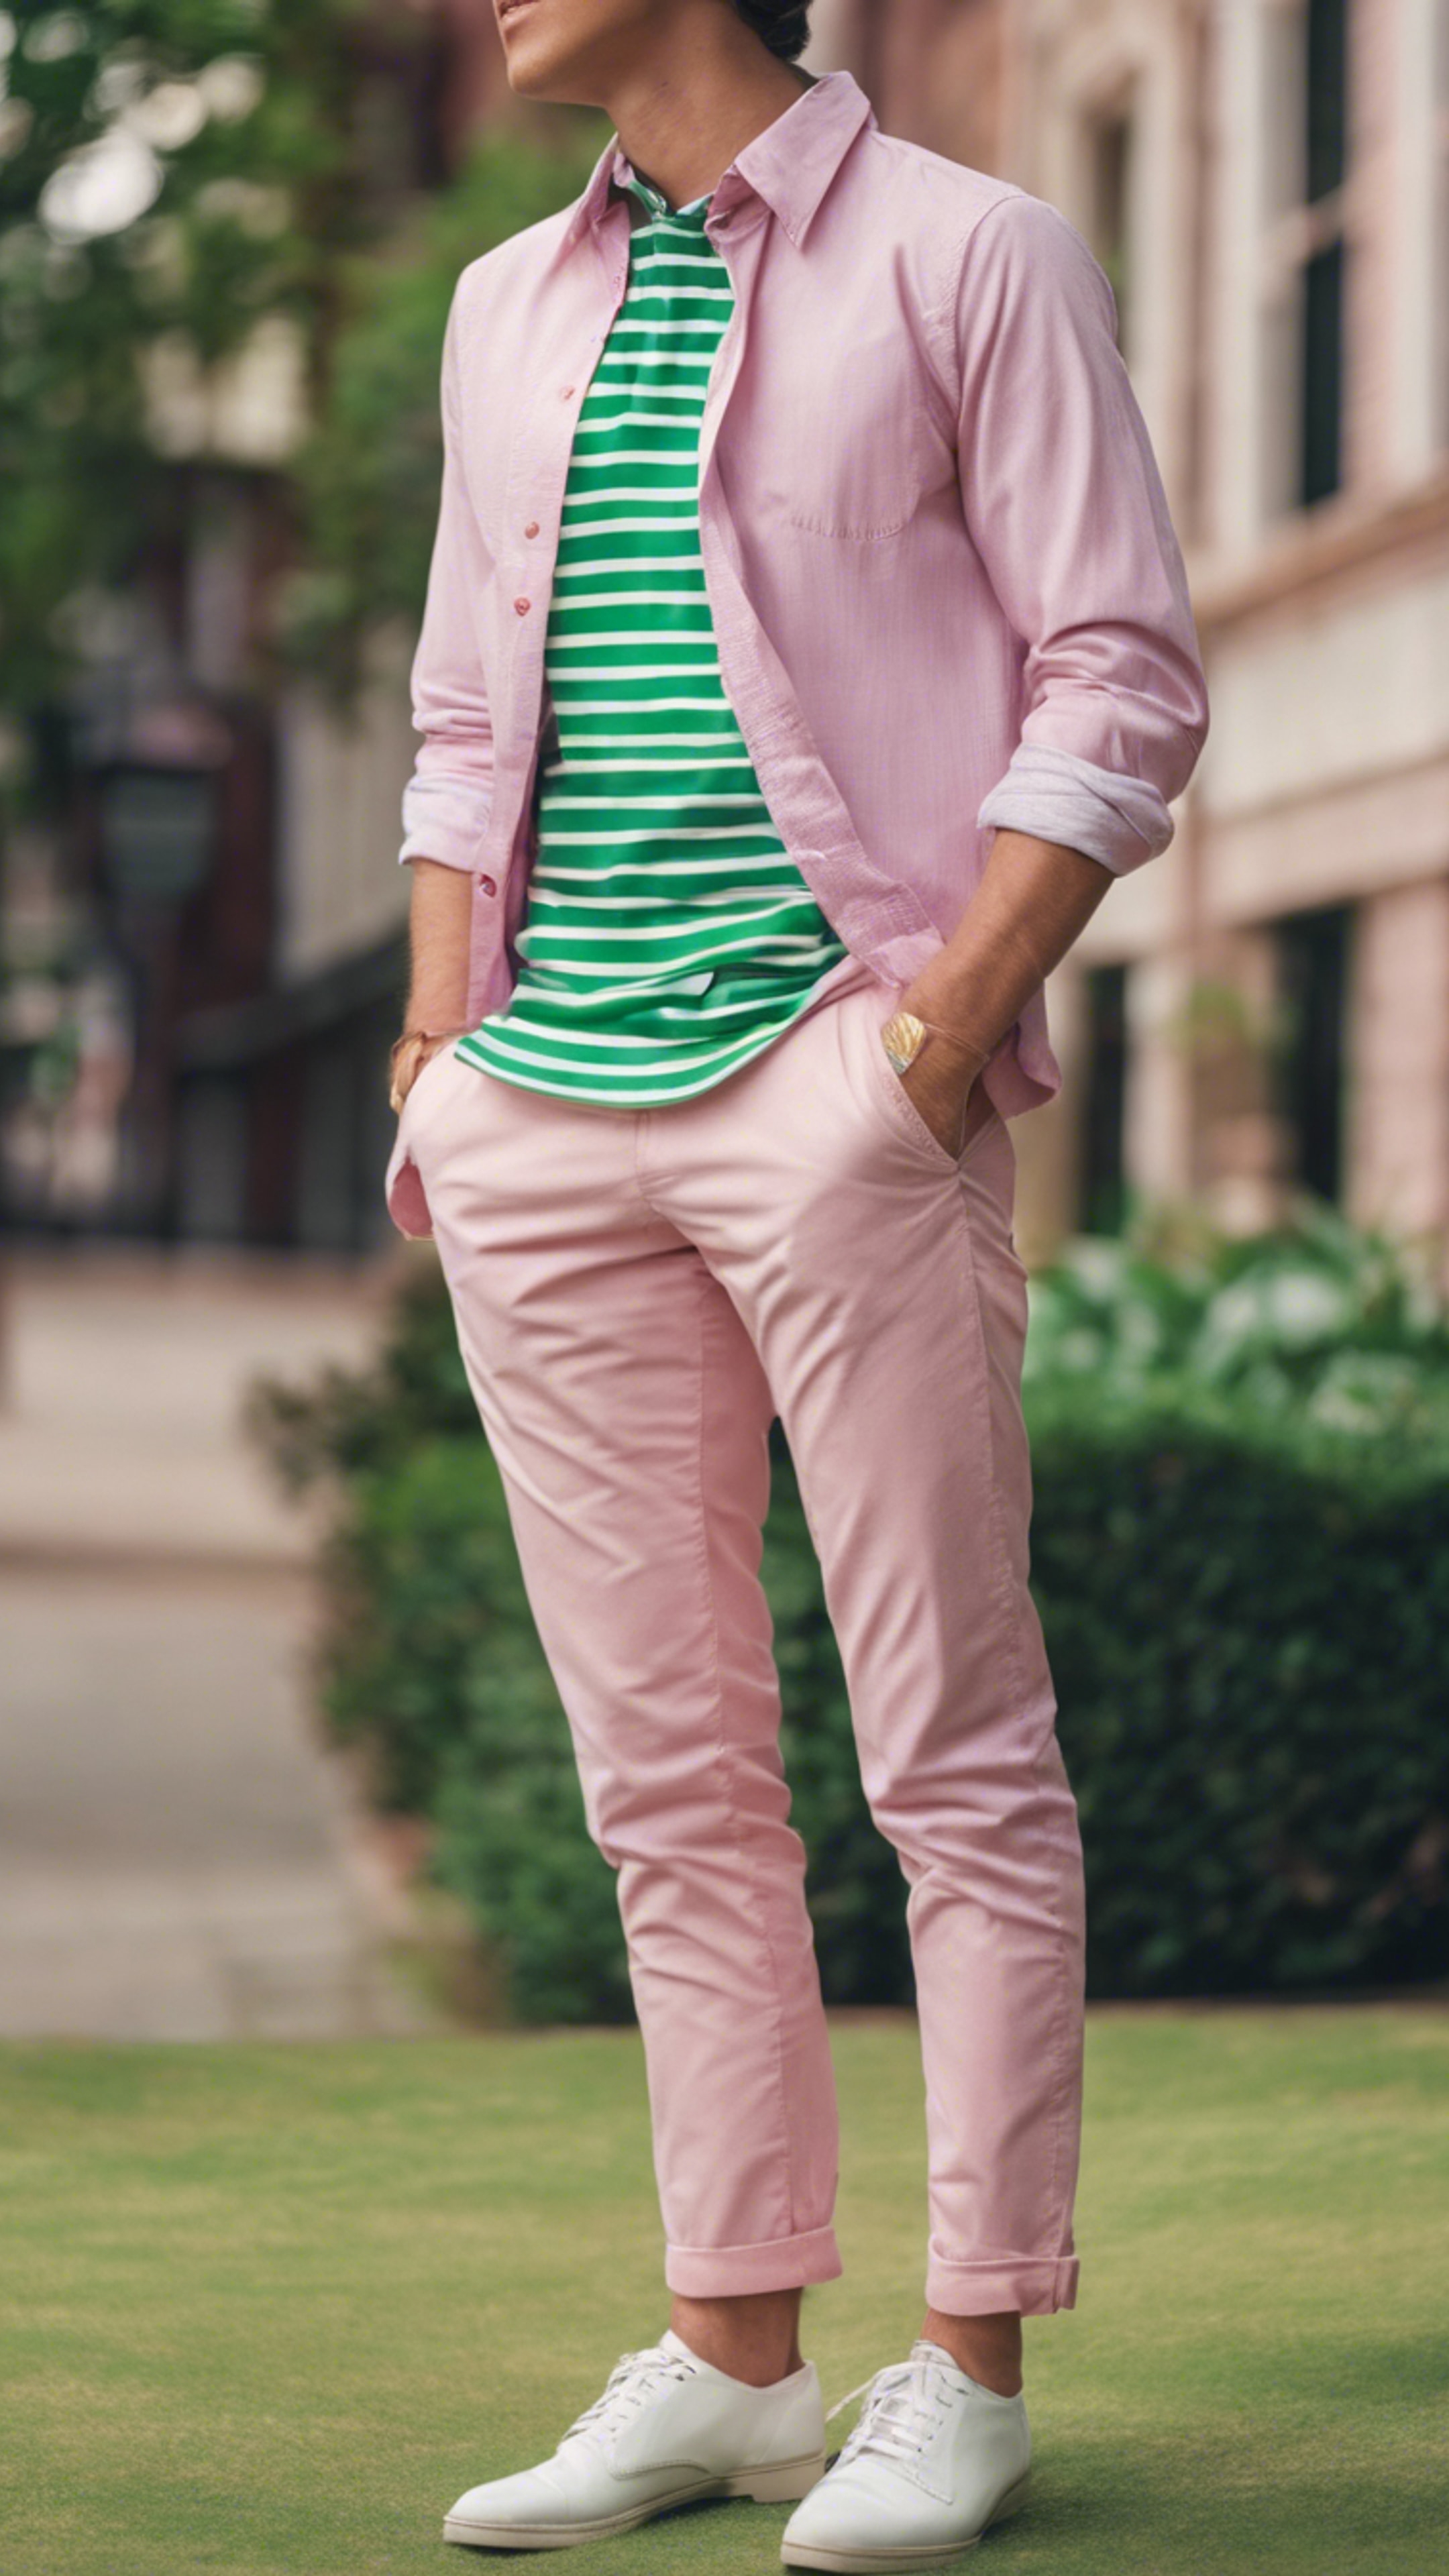 A classic preppy outfit in pink chinos with a green striped Oxford shirt.壁紙[7b2809c9502f40299443]